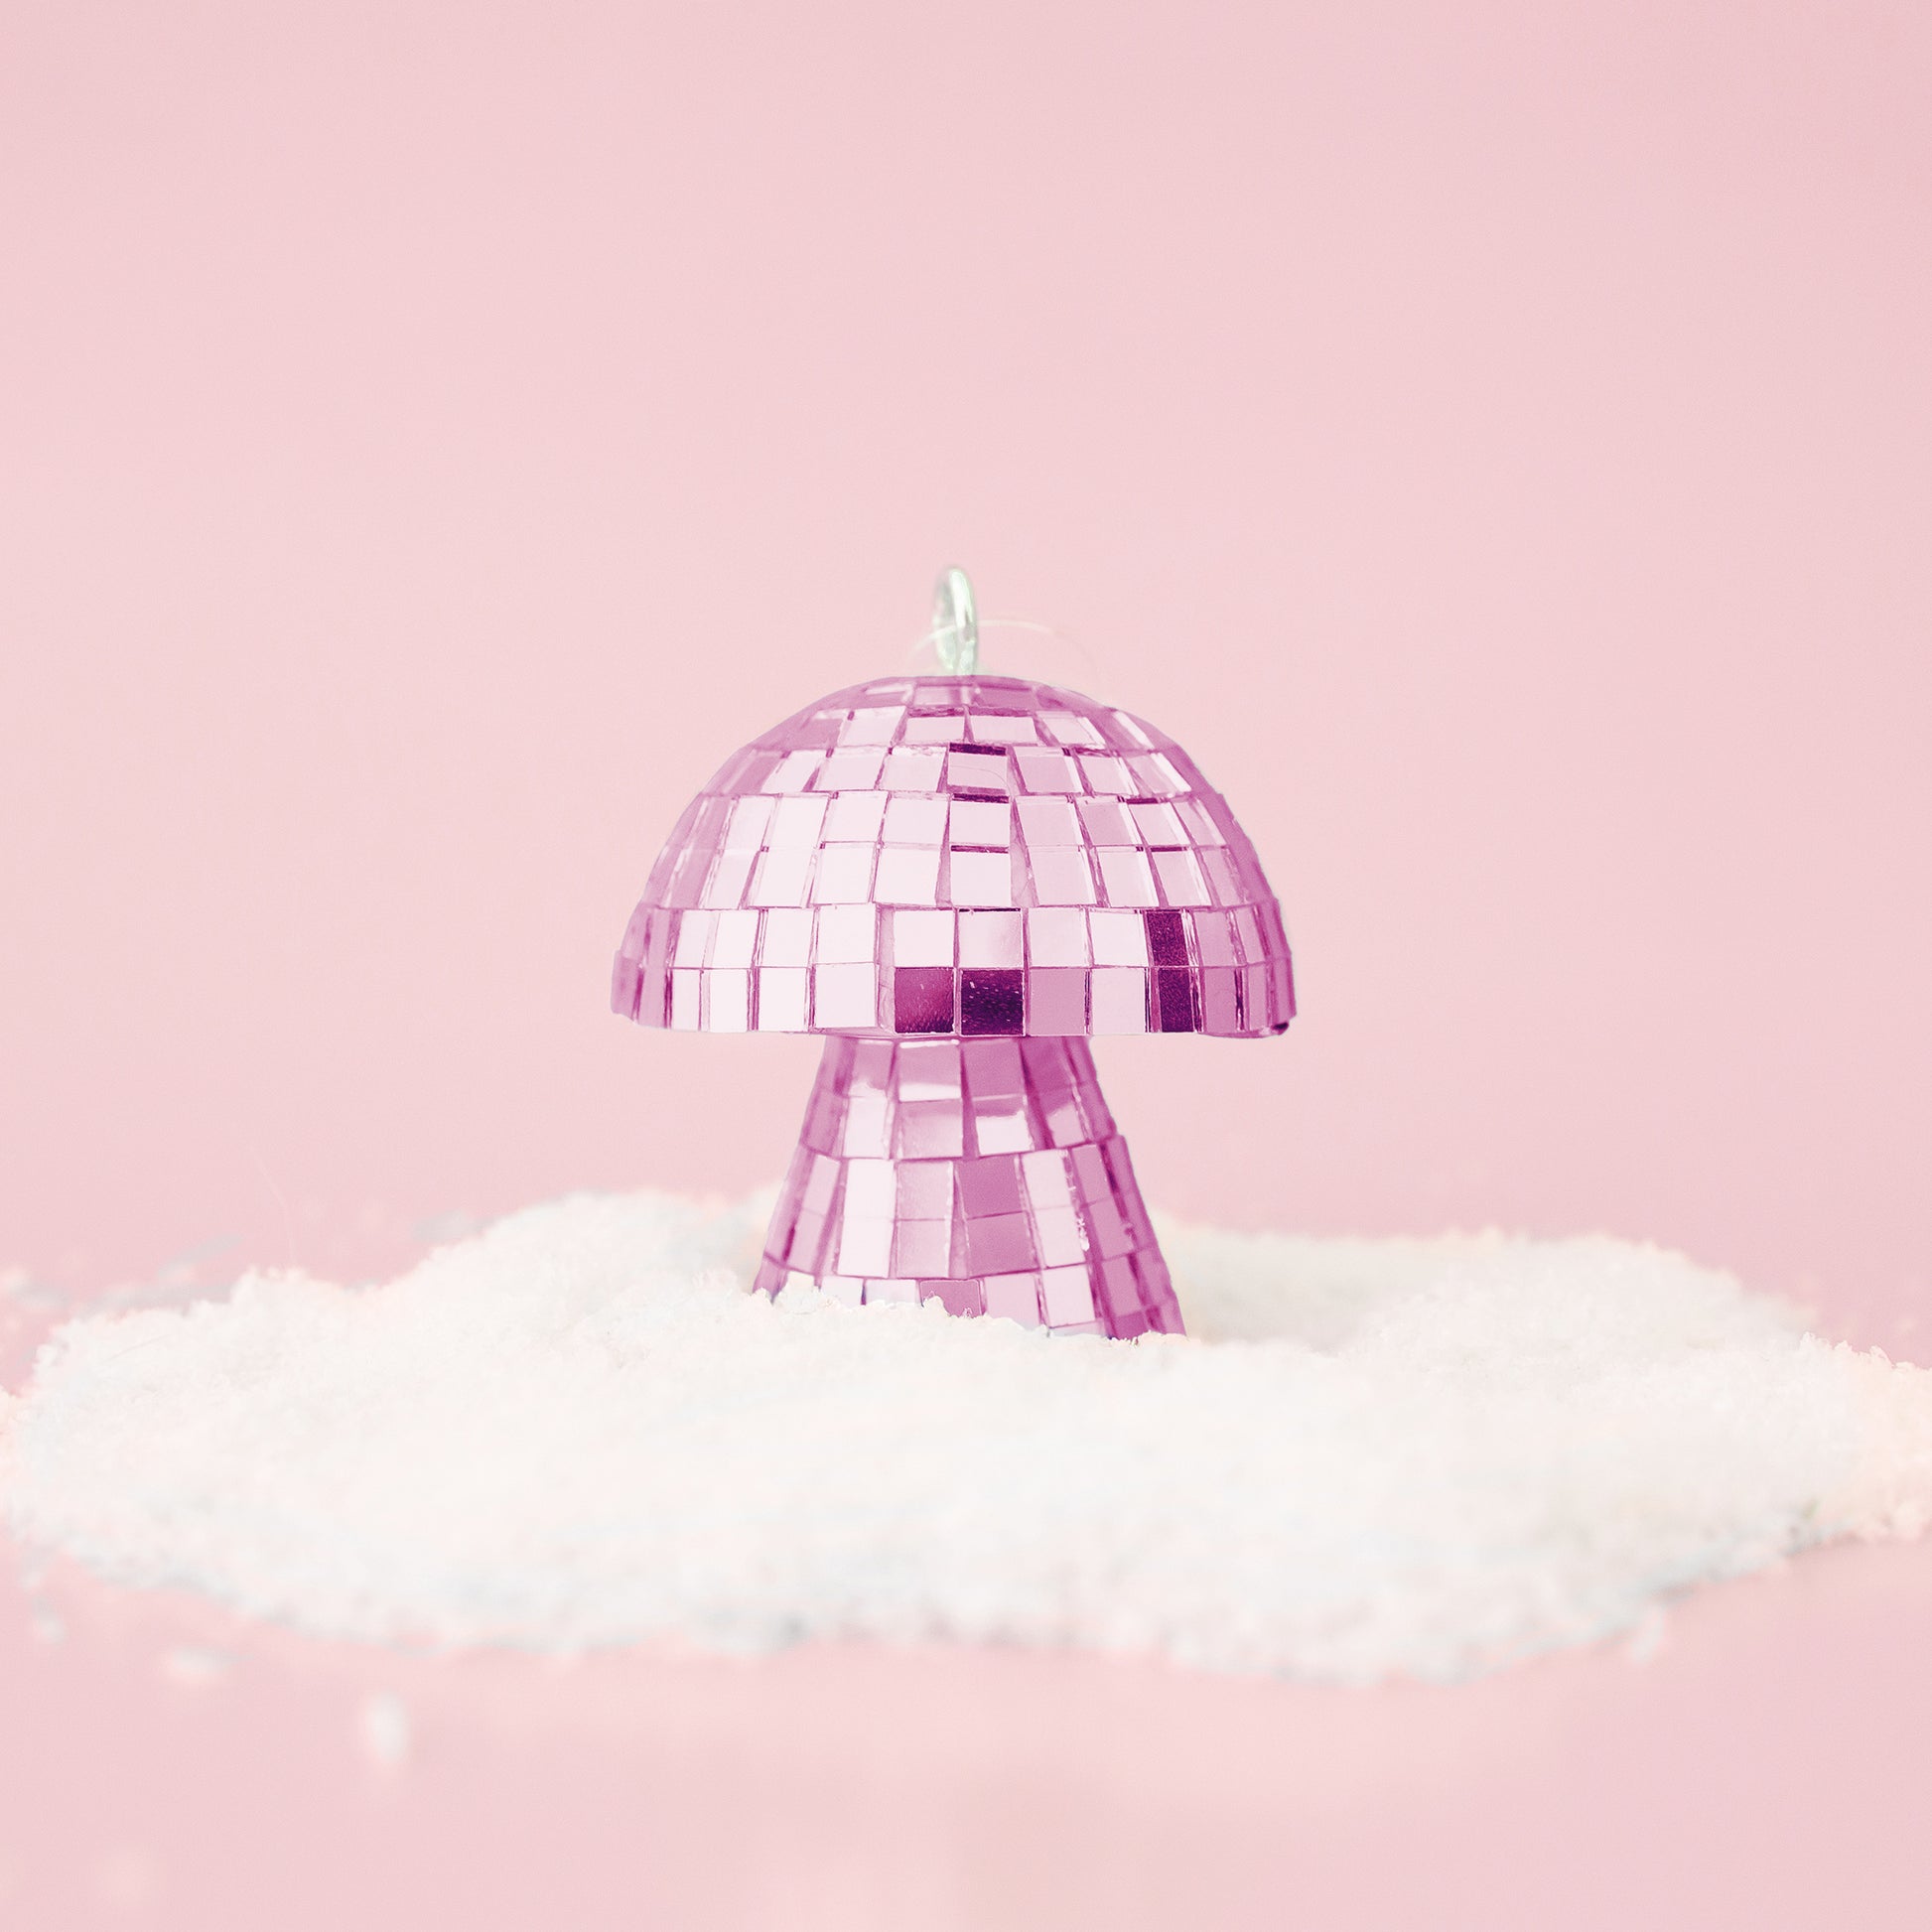 On a pink snowy background is a pink disco mushroom ornament. 